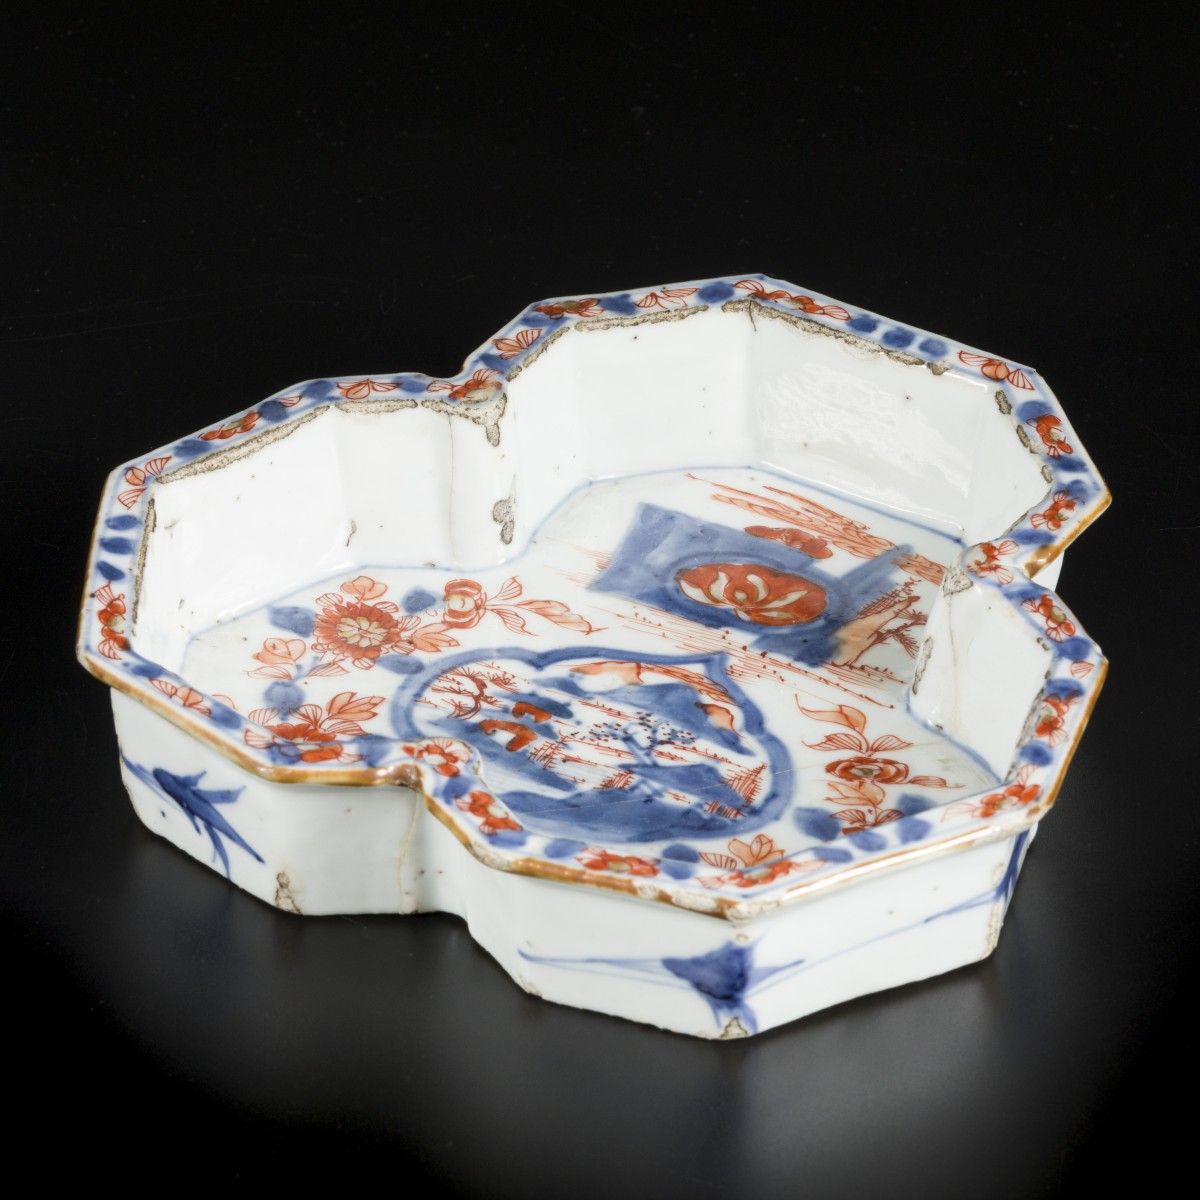 A porcelain Pettipan with Imari decoration. China, 18th century. 直径18厘米。裂缝和毛边。